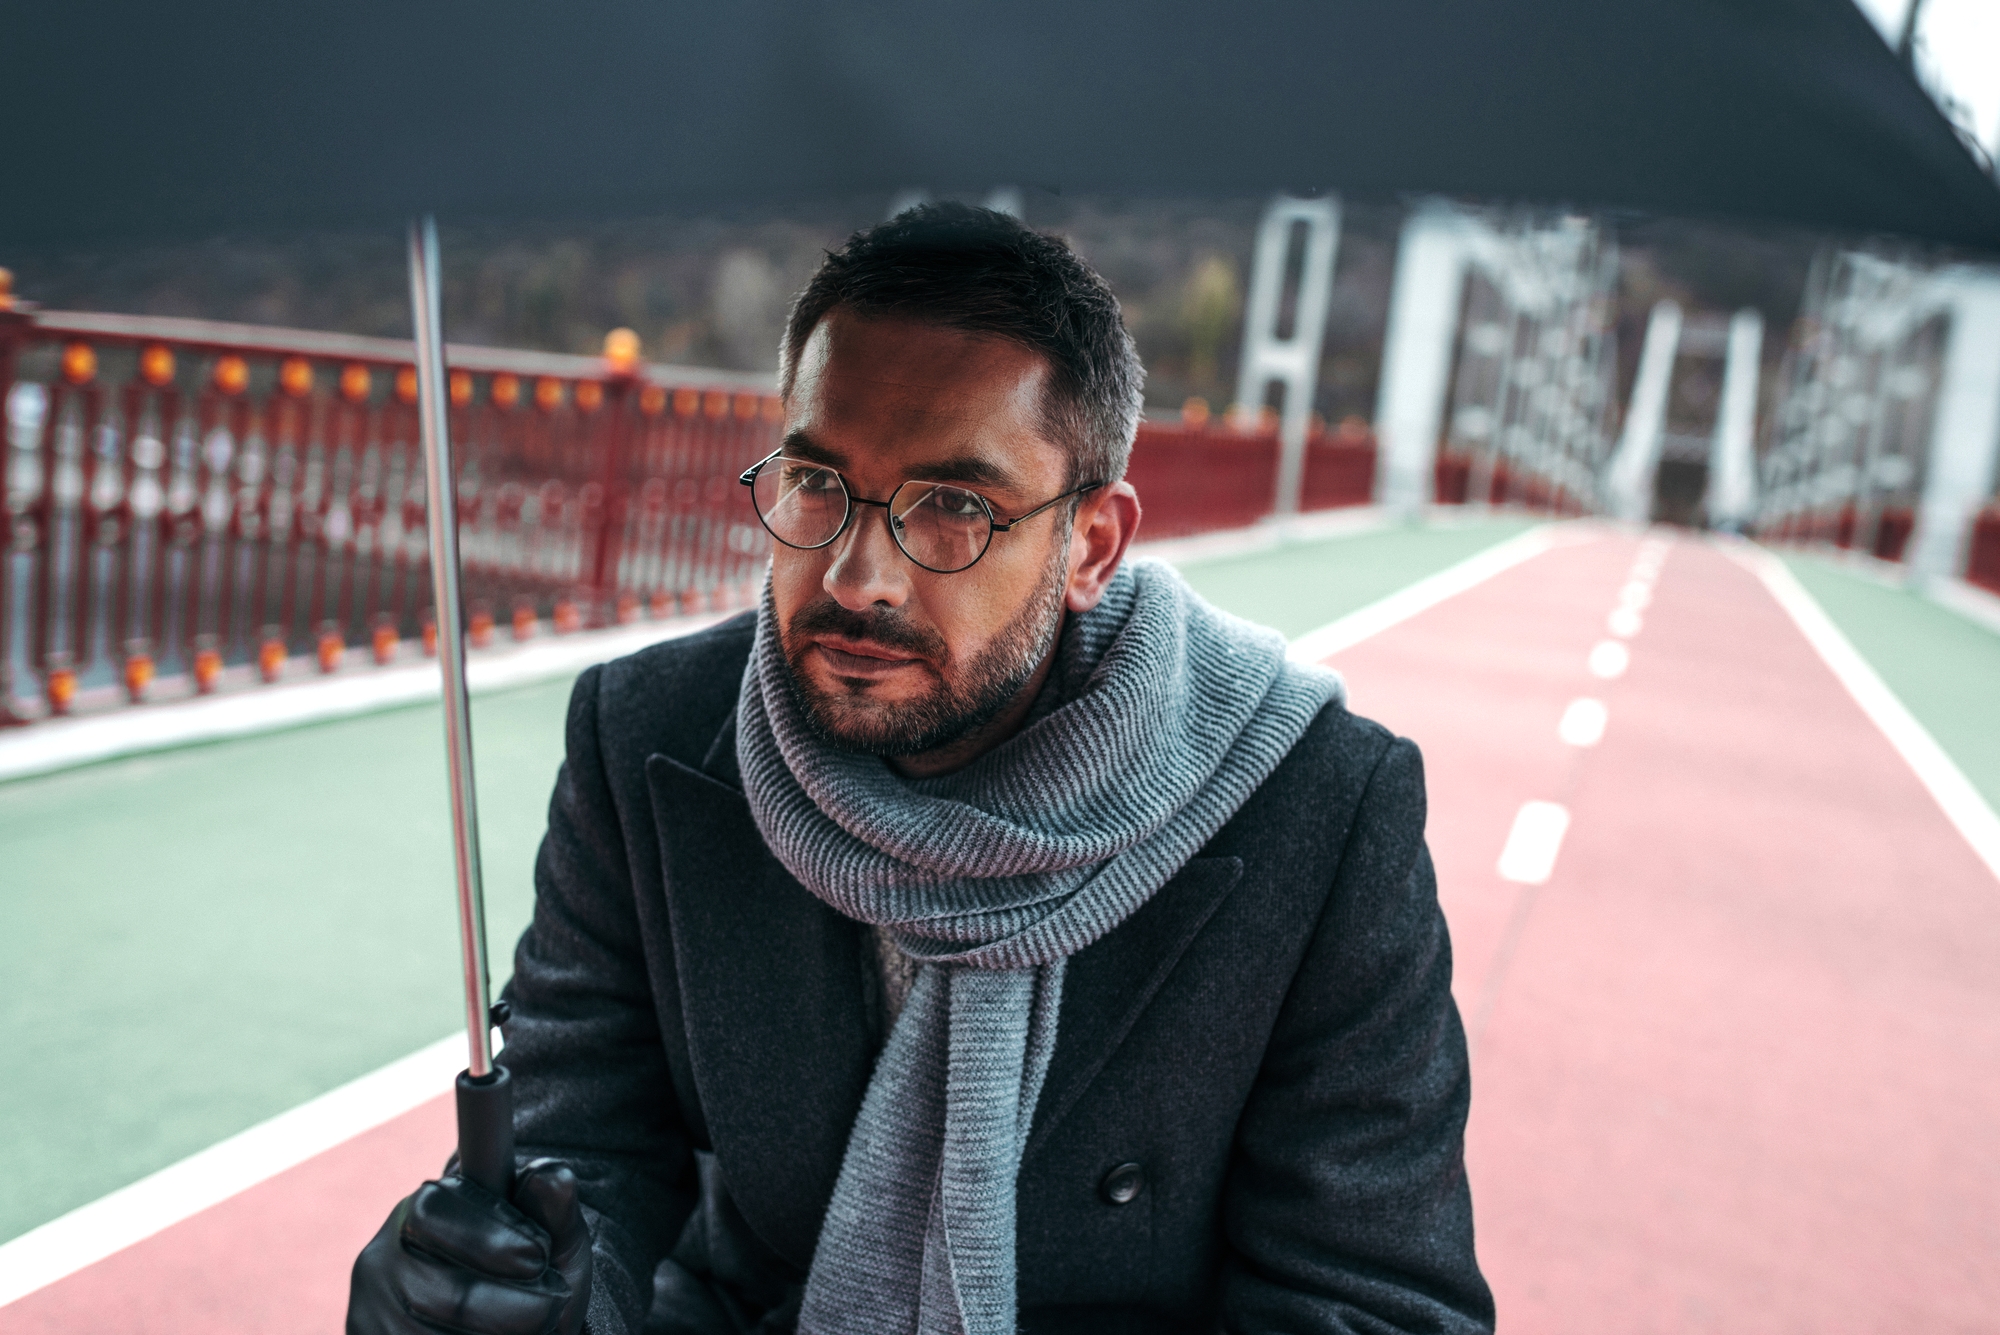 A man with glasses and a beard is sitting under a black umbrella on a bridge. He is wearing a dark coat and a gray scarf. The bridge has red railings and a green and red pathway with white lines. The background is slightly blurred, giving a sense of depth.